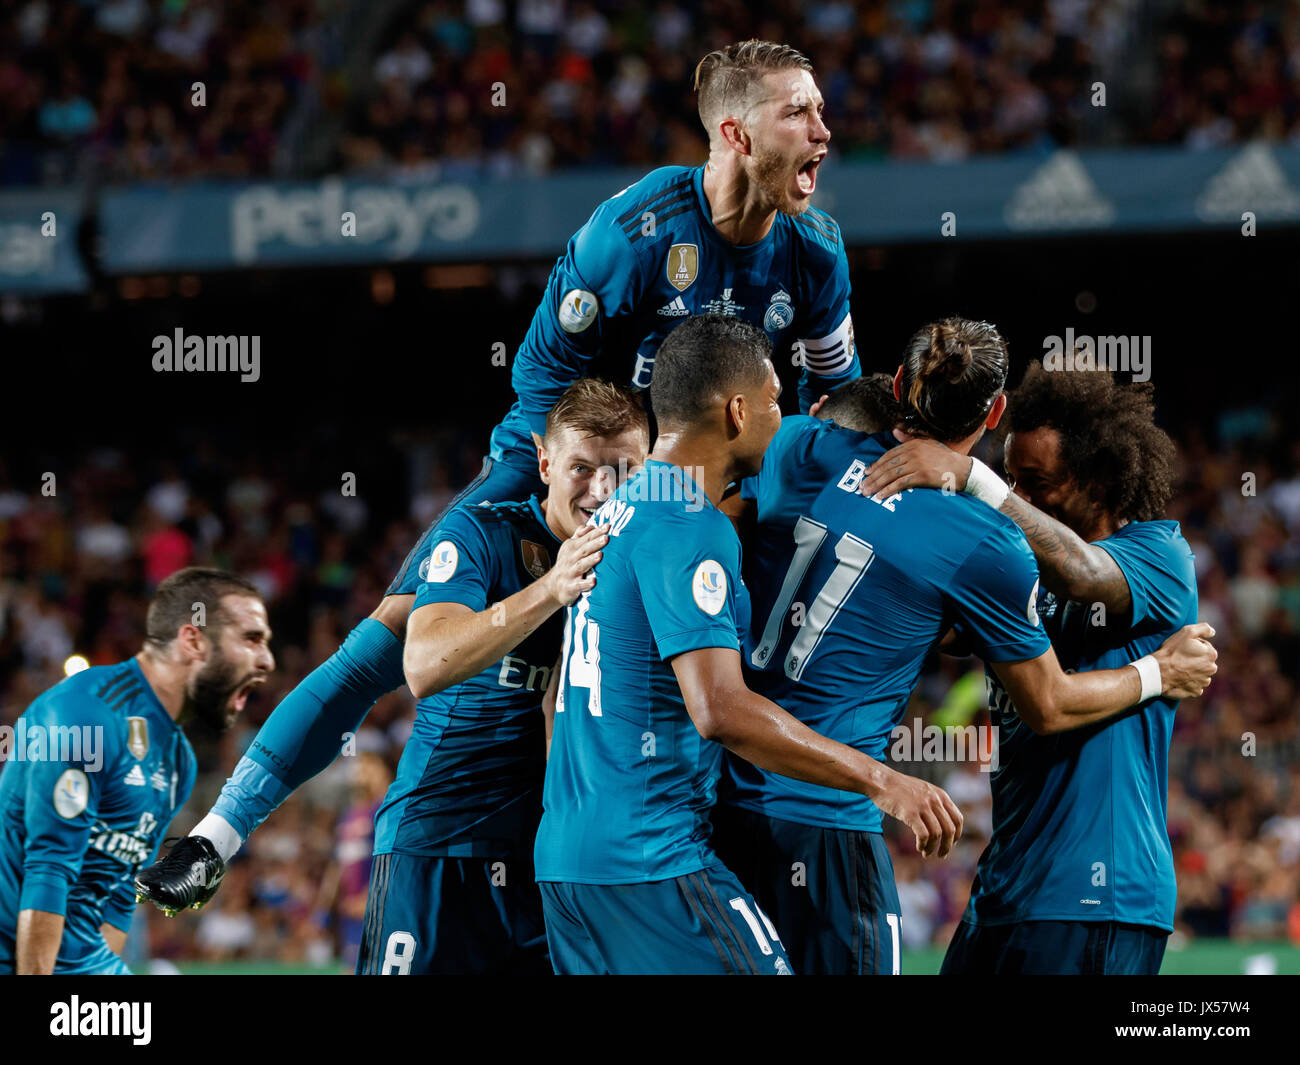 Camp Nou Stadium, Barcelona, Spain. 13th of August, 2017. Super Cup of Spain between FC Barcelona and Real Madrid. Real Madrid players celebrating the goal. Credit: David Ramírez/Alamy Live News Stock Photo